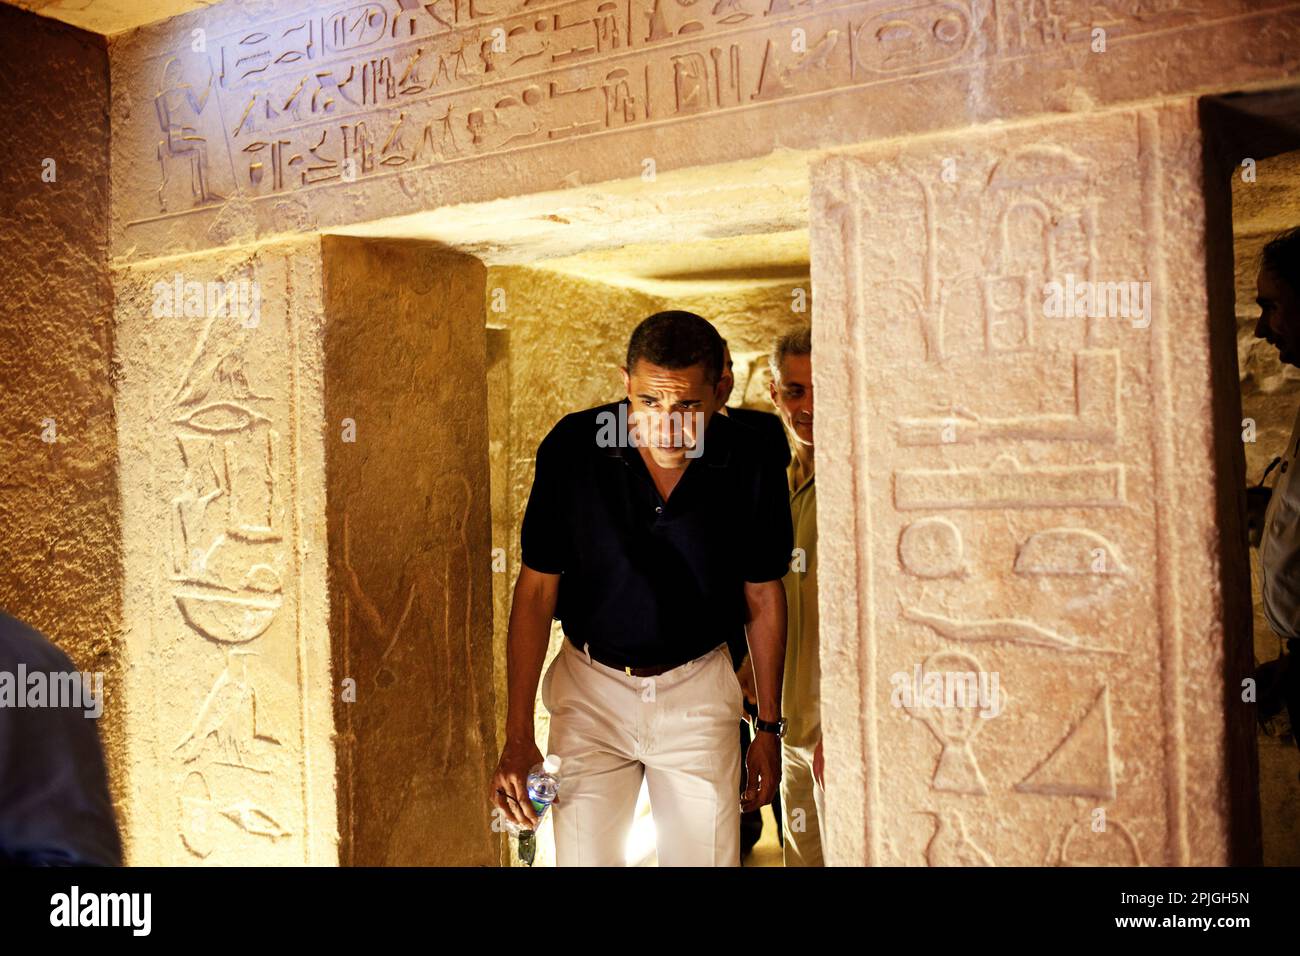 President Barack Obama ducks his head to get through an entranceway on a tour of the Pyramids and Sphinx in Egypt, June 4, 2009.  At center-right is the hieroglyphic that the President comment on saying it looked like him. (Official White House Photo by Pete Souza) This official White House photograph is being made available for publication by news organizations and/or for personal use printing by the subject(s) of the photograph. The photograph may not be manipulated in any way or used in materials, advertisements, products, or promotions that in any way suggest approval or endorsement of the Stock Photo